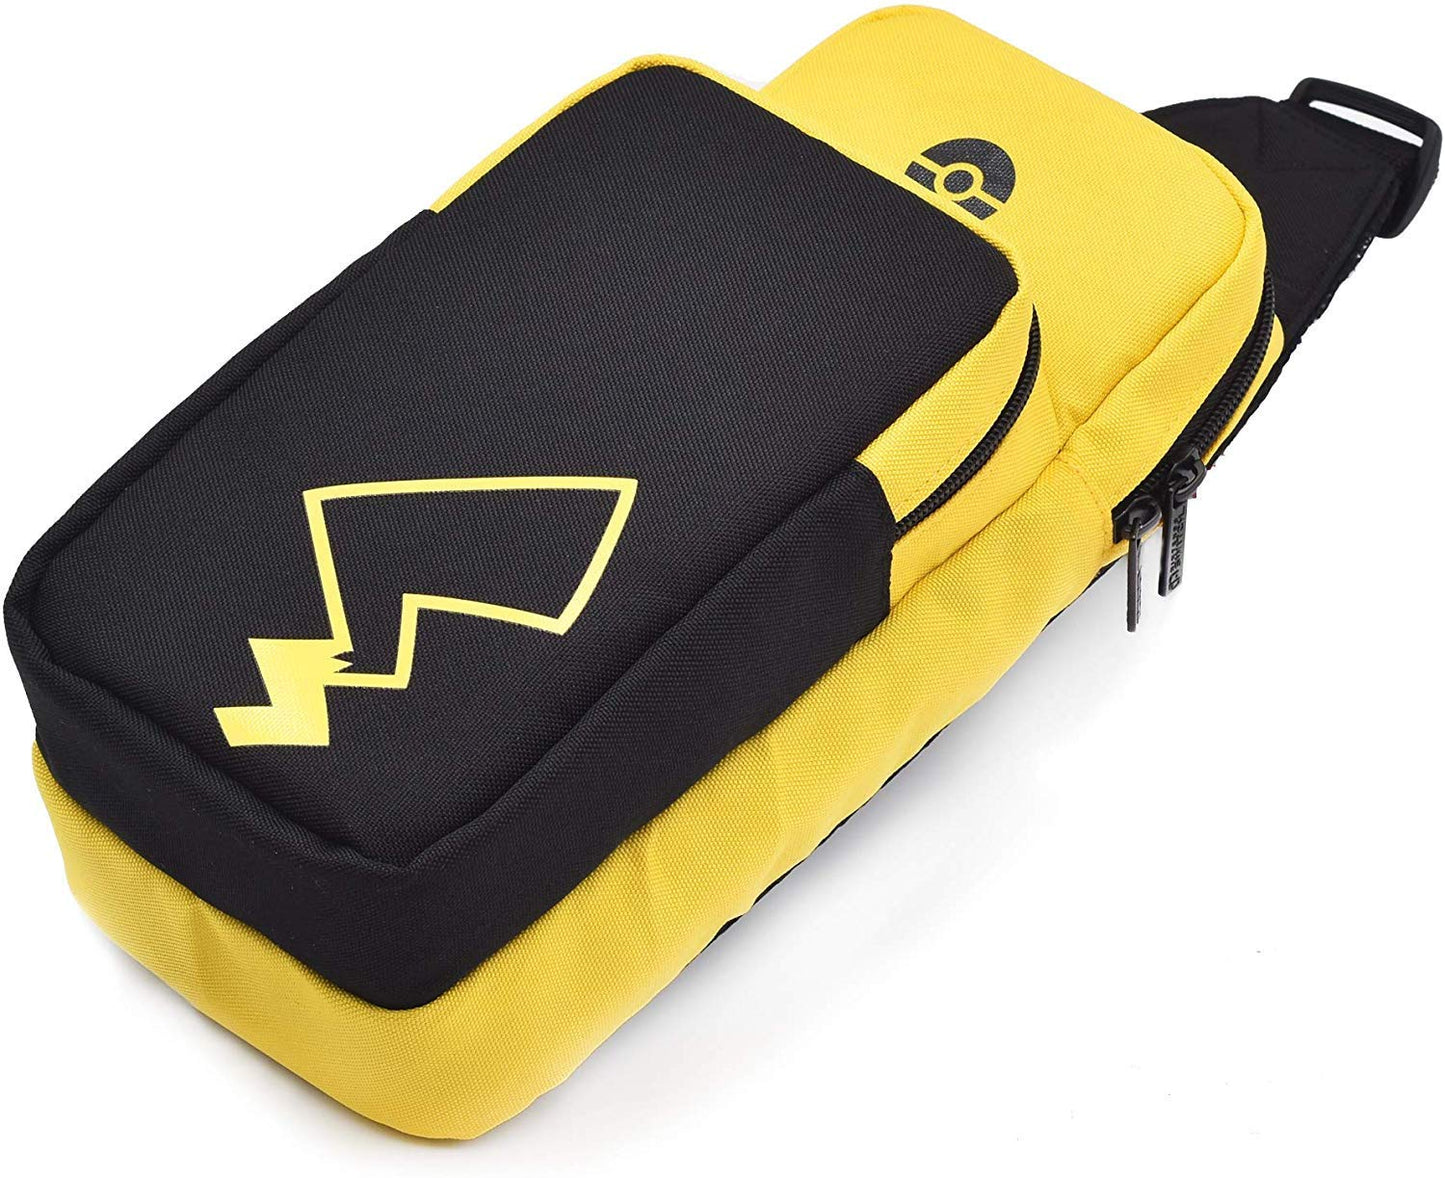 Hori Go Pack Pouch Bag Case for Nintendo Switch - Pikachu Edition